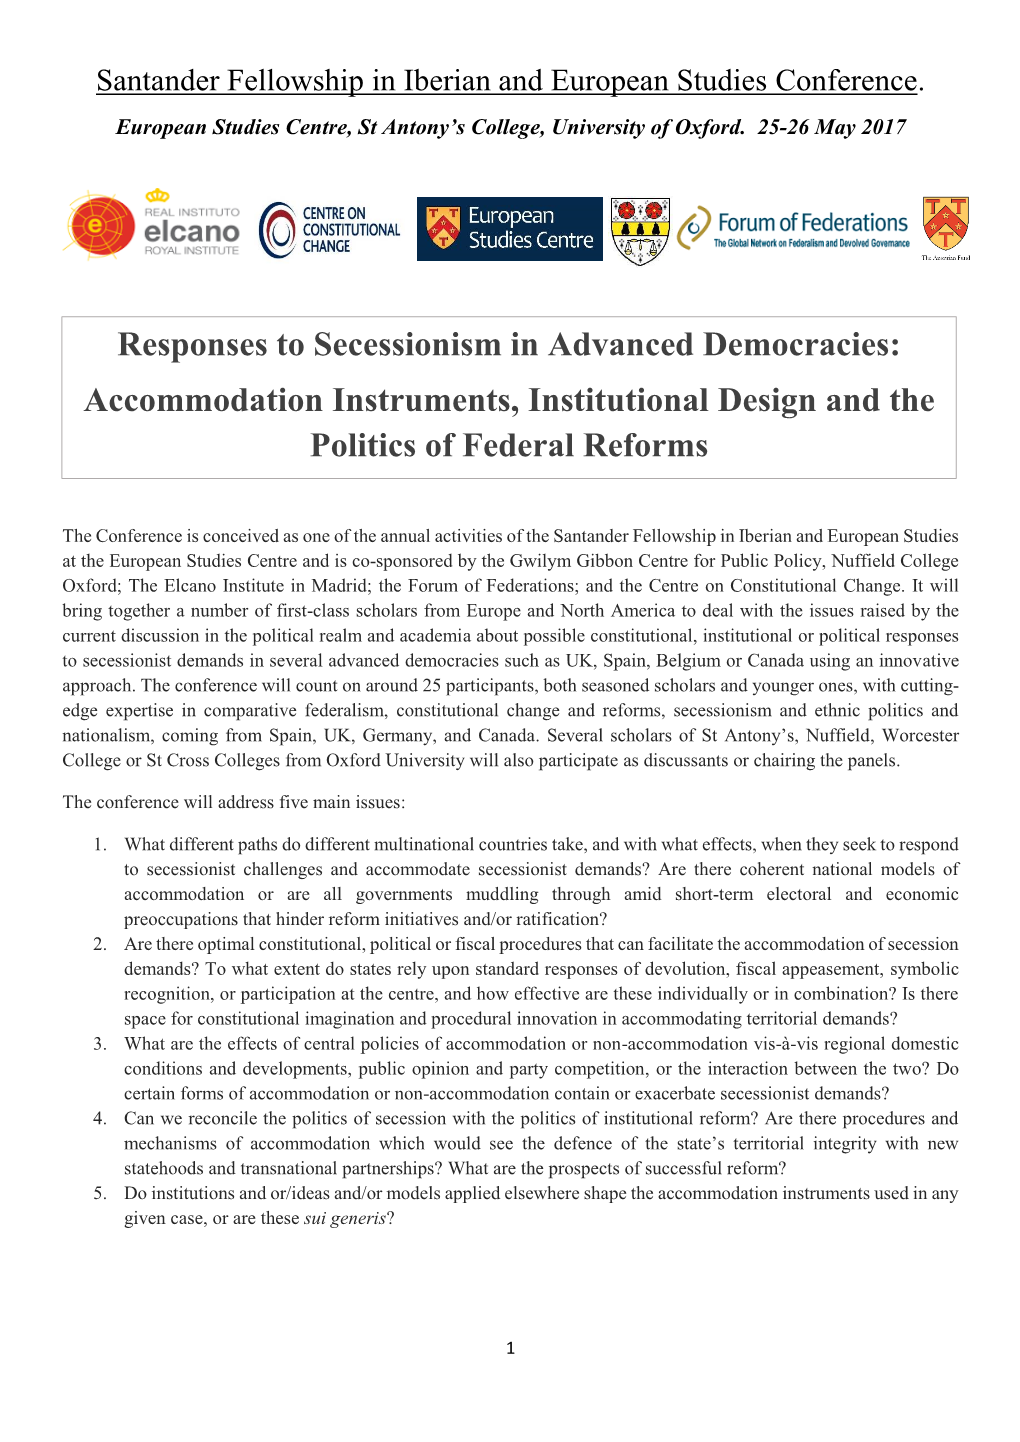 Responses to Secessionism in Advanced Democracies: Accommodation Instruments, Institutional Design and the Politics of Federal Reforms